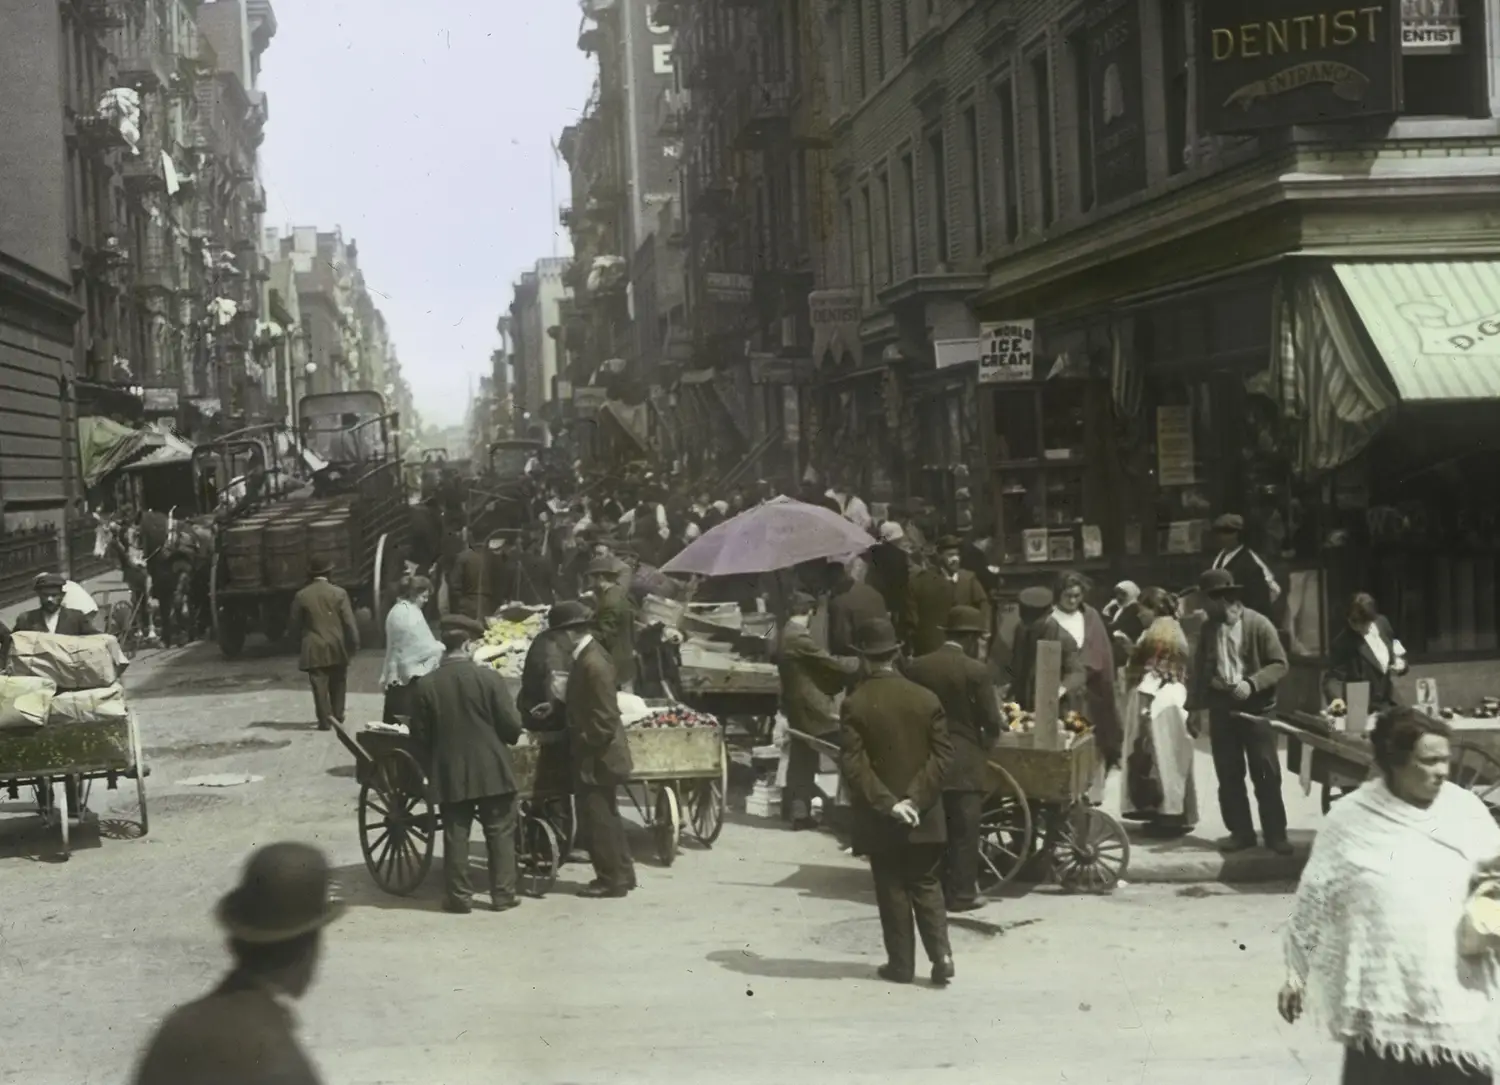 A bustling street scene. People and horse-drawn wagons crowd the road.